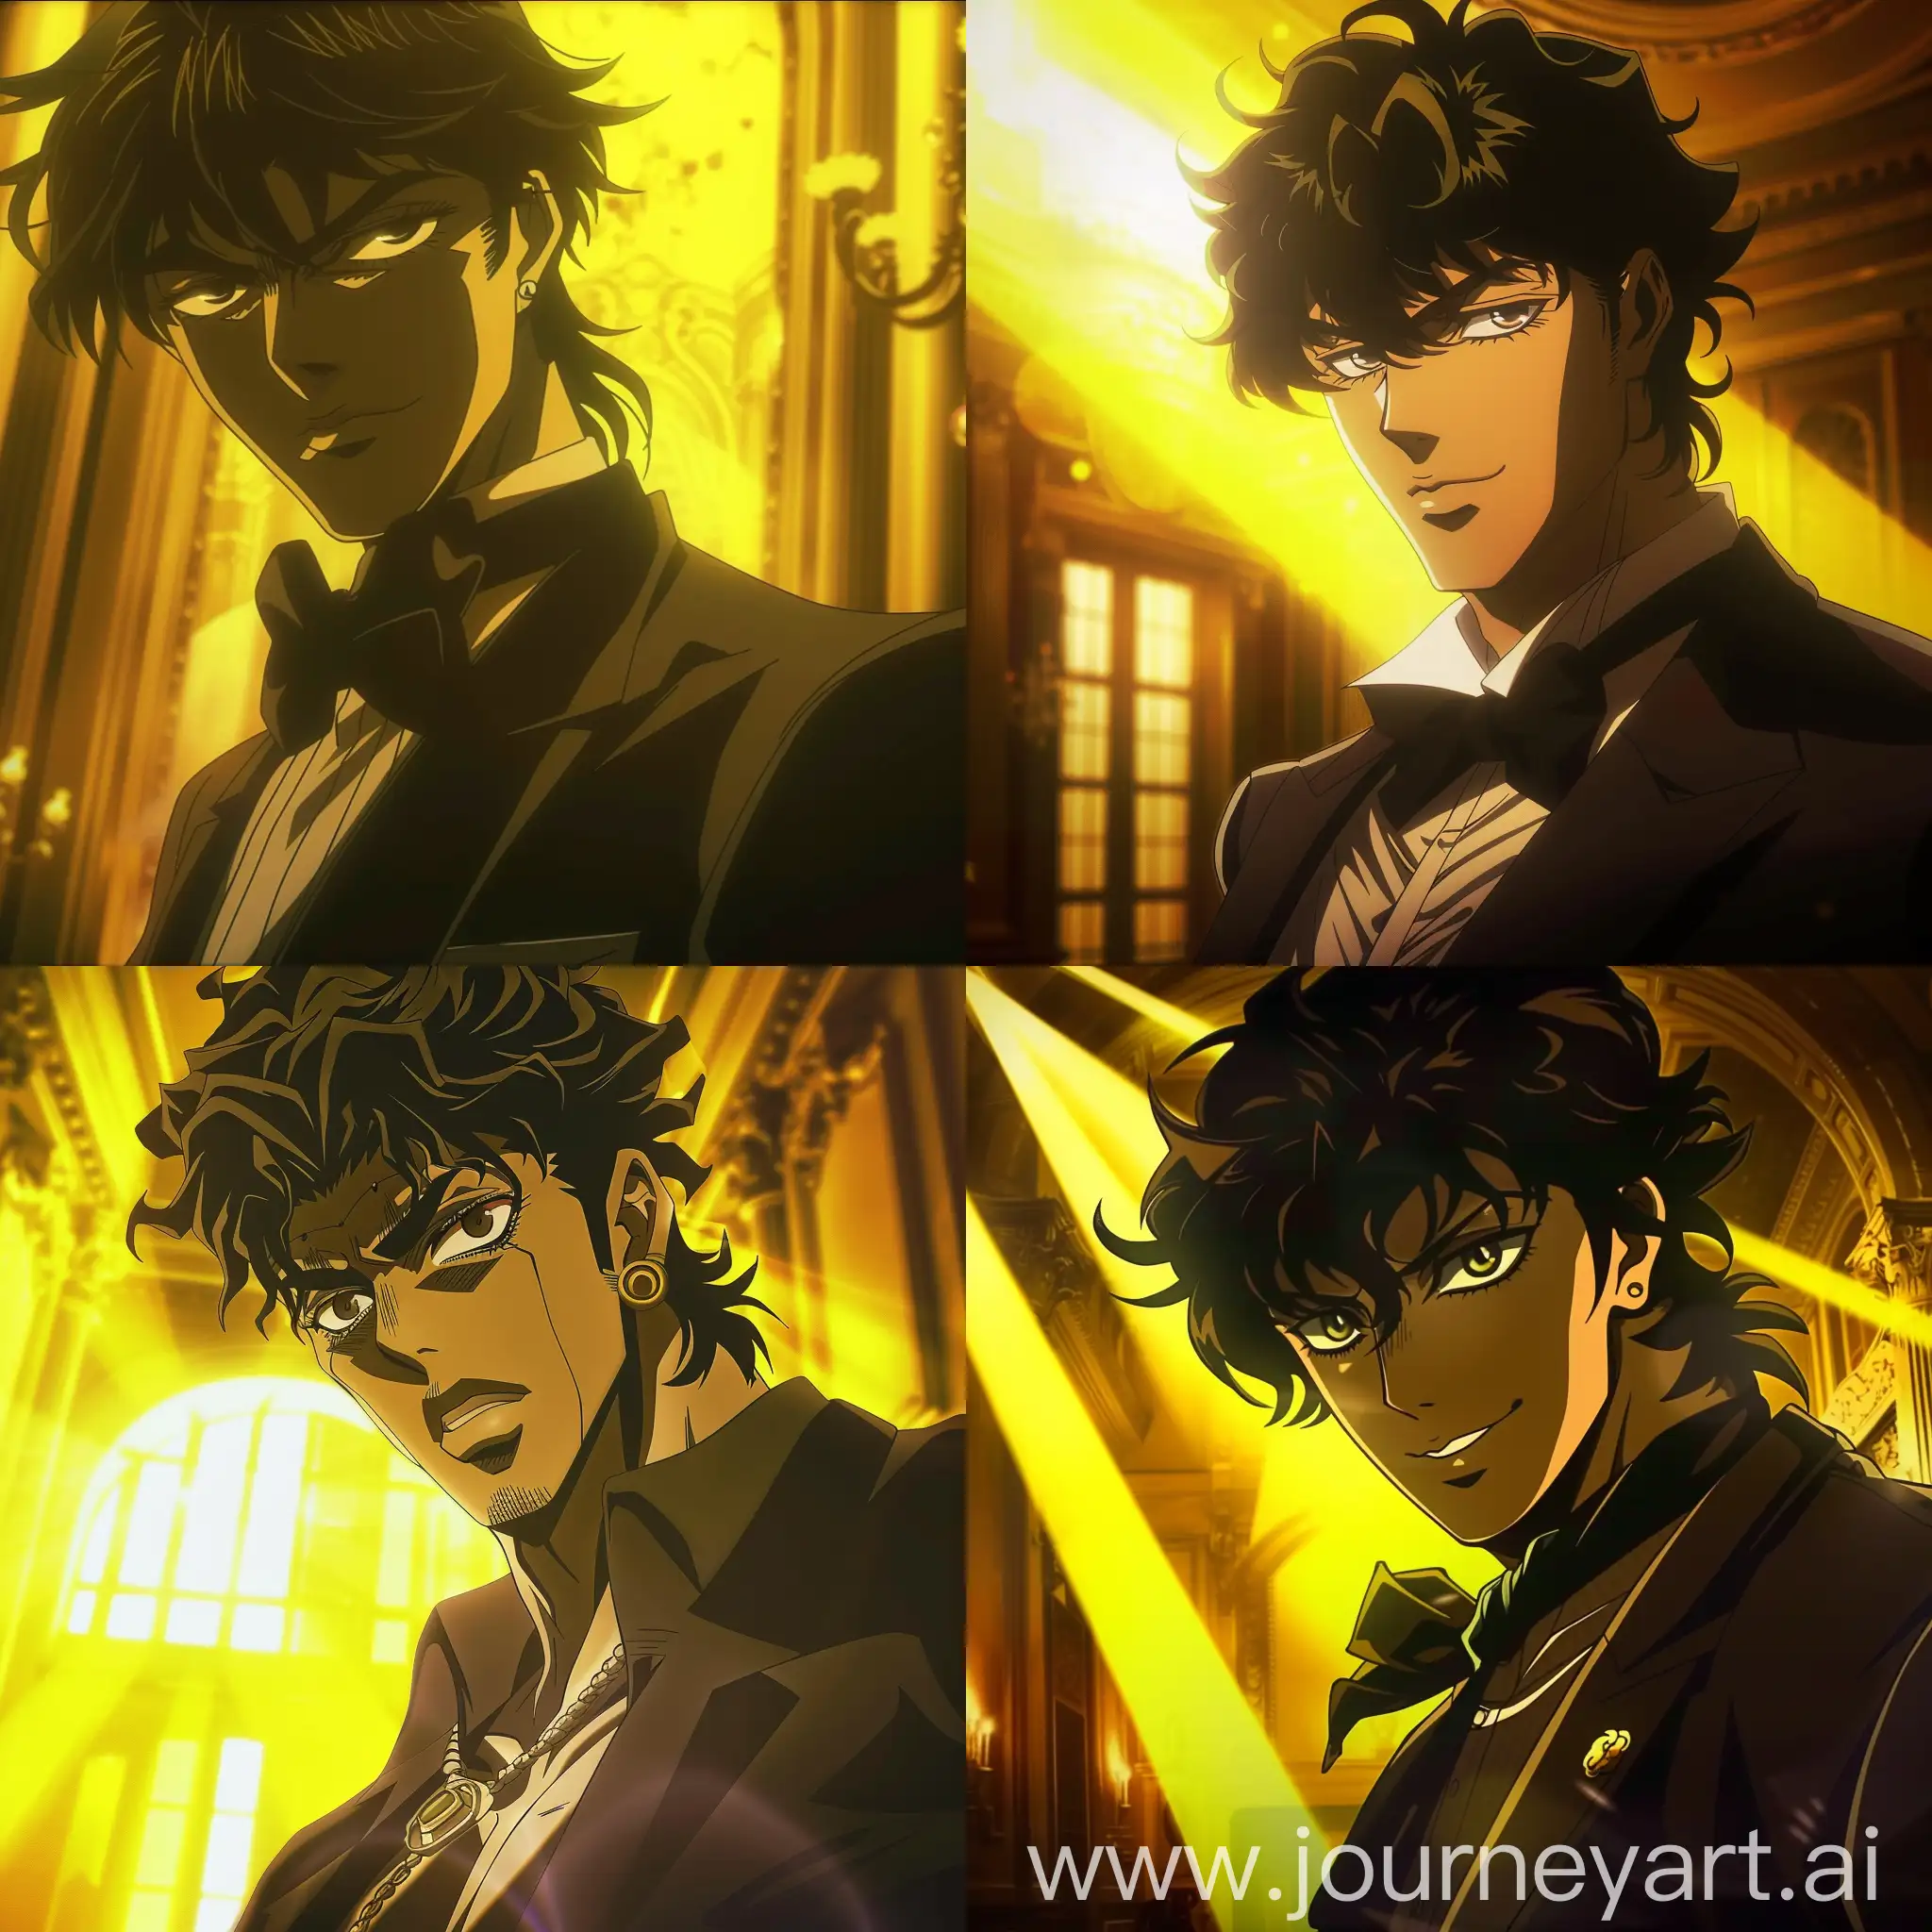 Jotaro Kujo at a black tie event. In a mansion. Yellow light. Closeup camera shot. Anime art style